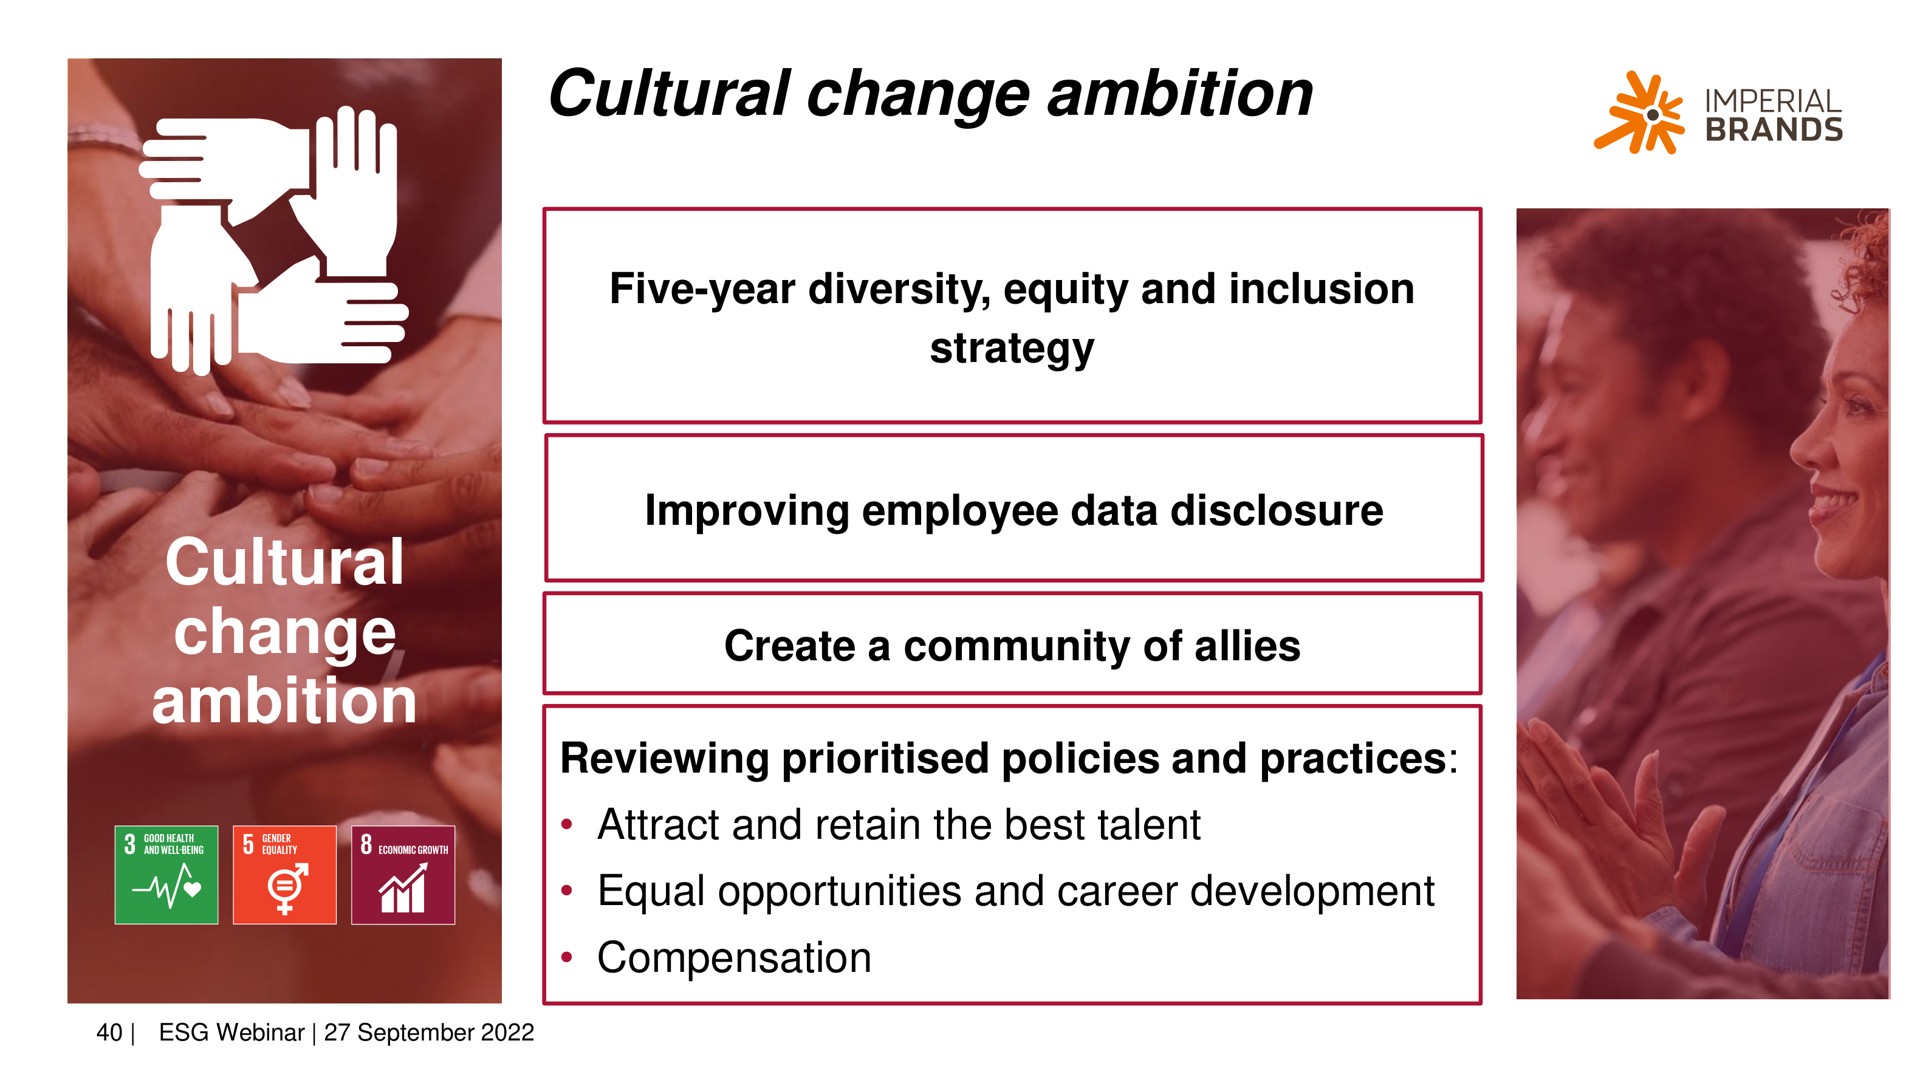 cultural change ambition cultural change ambition | Imperial Brands